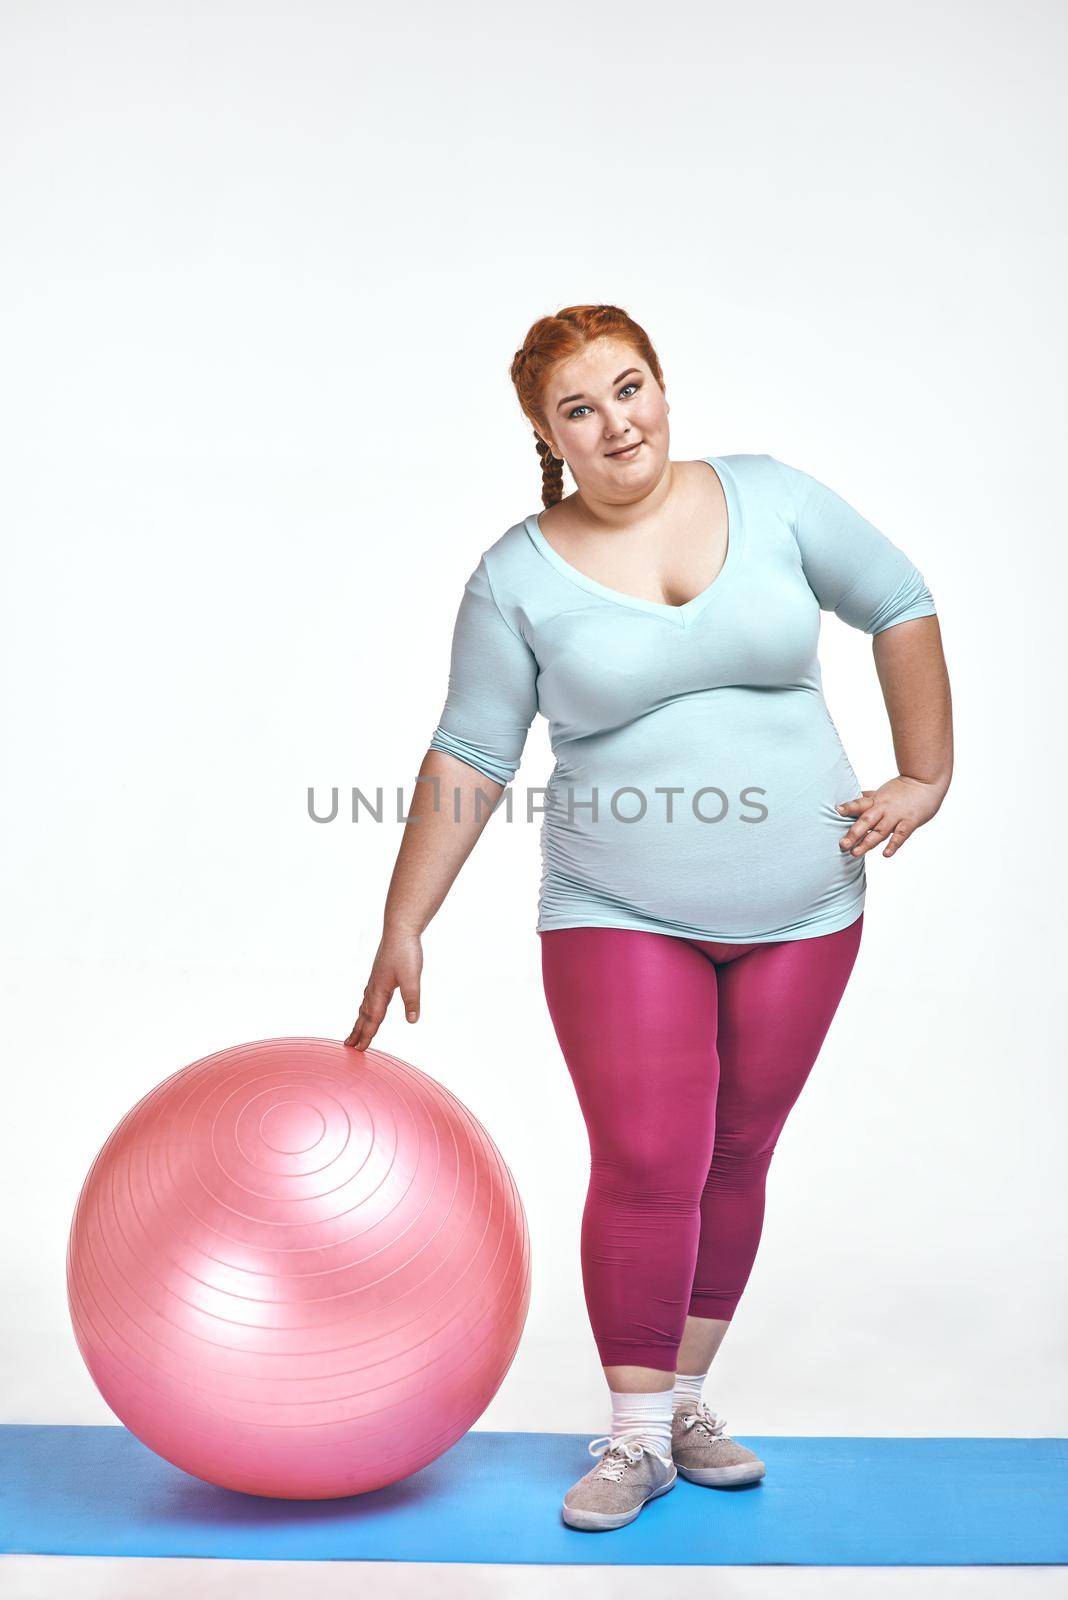 Funny picture of amusing, red haired, chubby woman which is holding a ball by friendsstock